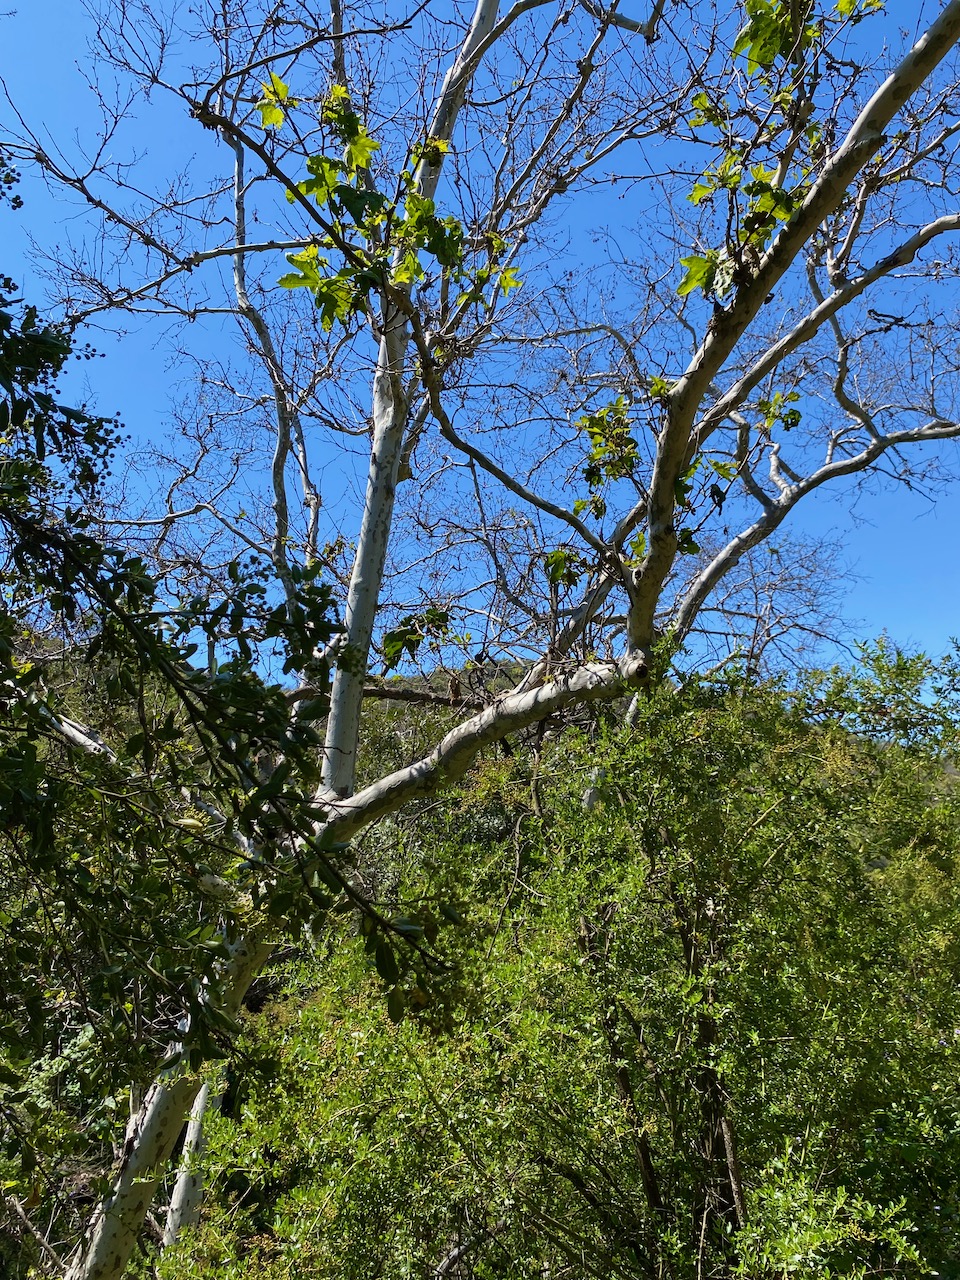 A tall Western Sycamore (Platanus racemose) along the Garapito Canyon Trail in the Marvin Braude Mulholland Gateway Park in Tarzana, CA.